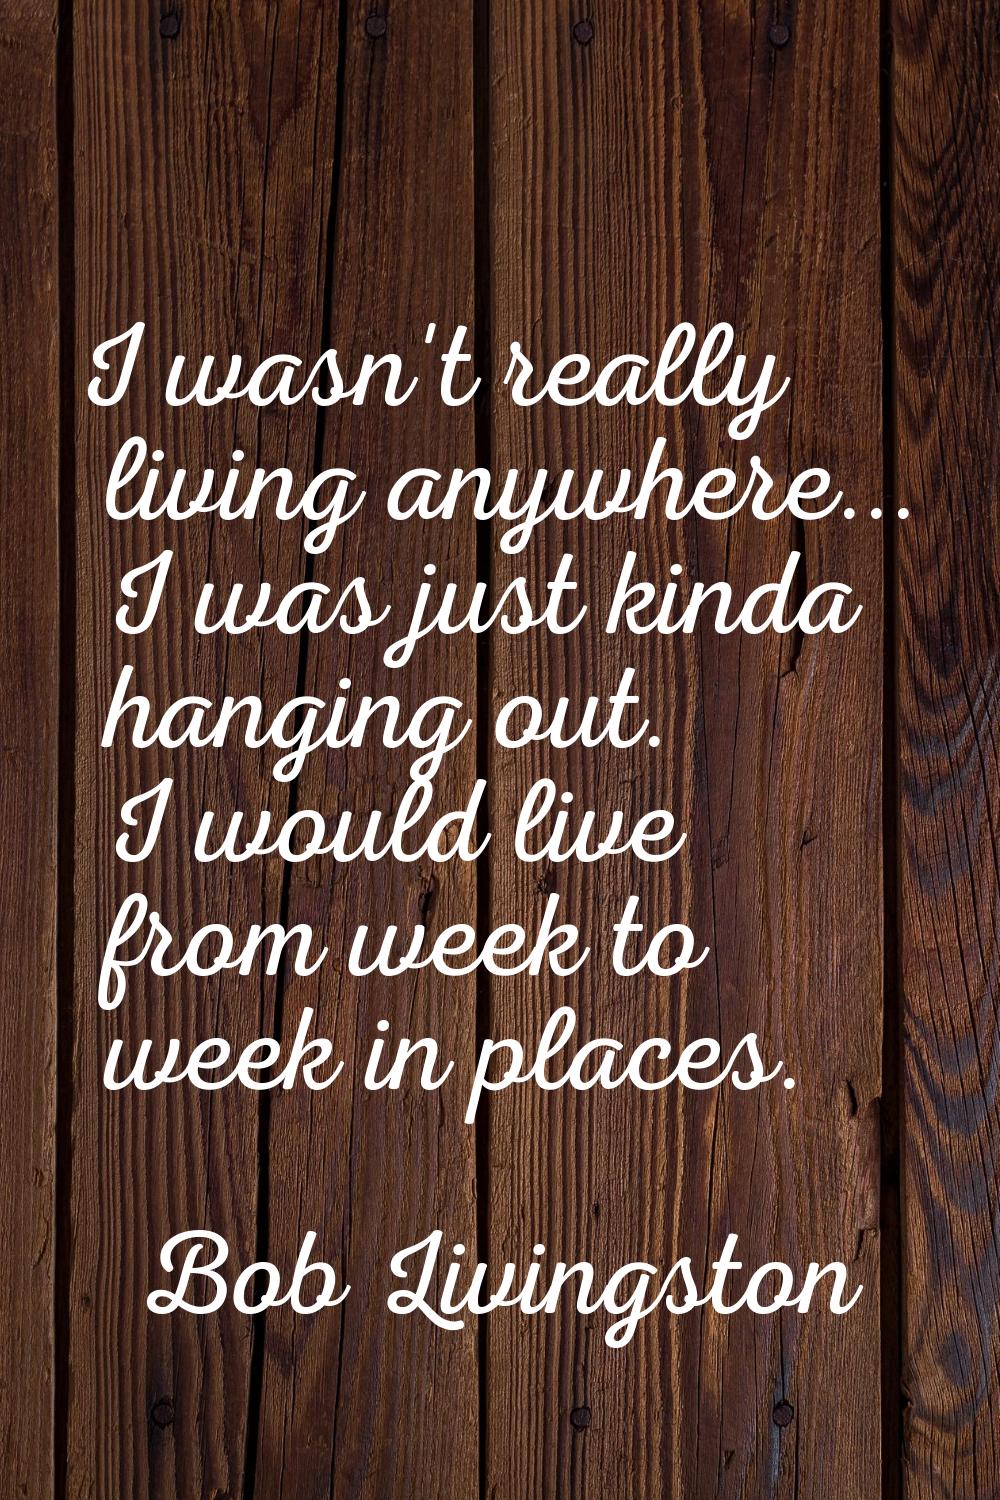 I wasn't really living anywhere... I was just kinda hanging out. I would live from week to week in 